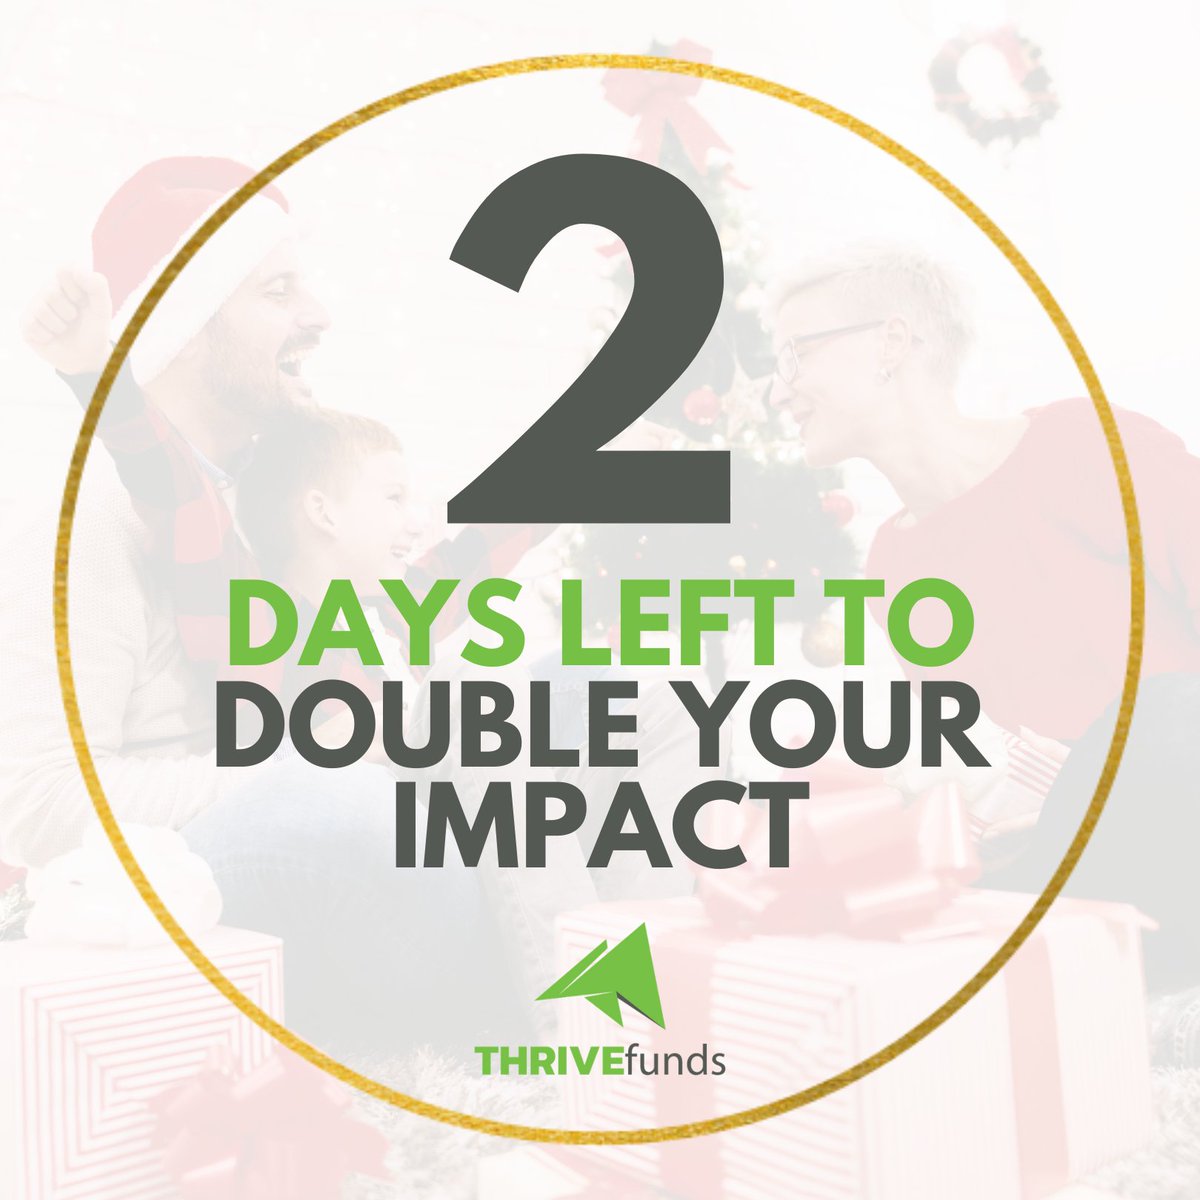 The best gifts come in pairs, and for the next 2 DAYS, every dollar invested into the critical needs of low-income families will be DOUBLED!🎉

This holiday season, you could give the gift of THRIVING to a low-income family in need: zurl.co/Vjkx

#HolidayGiving